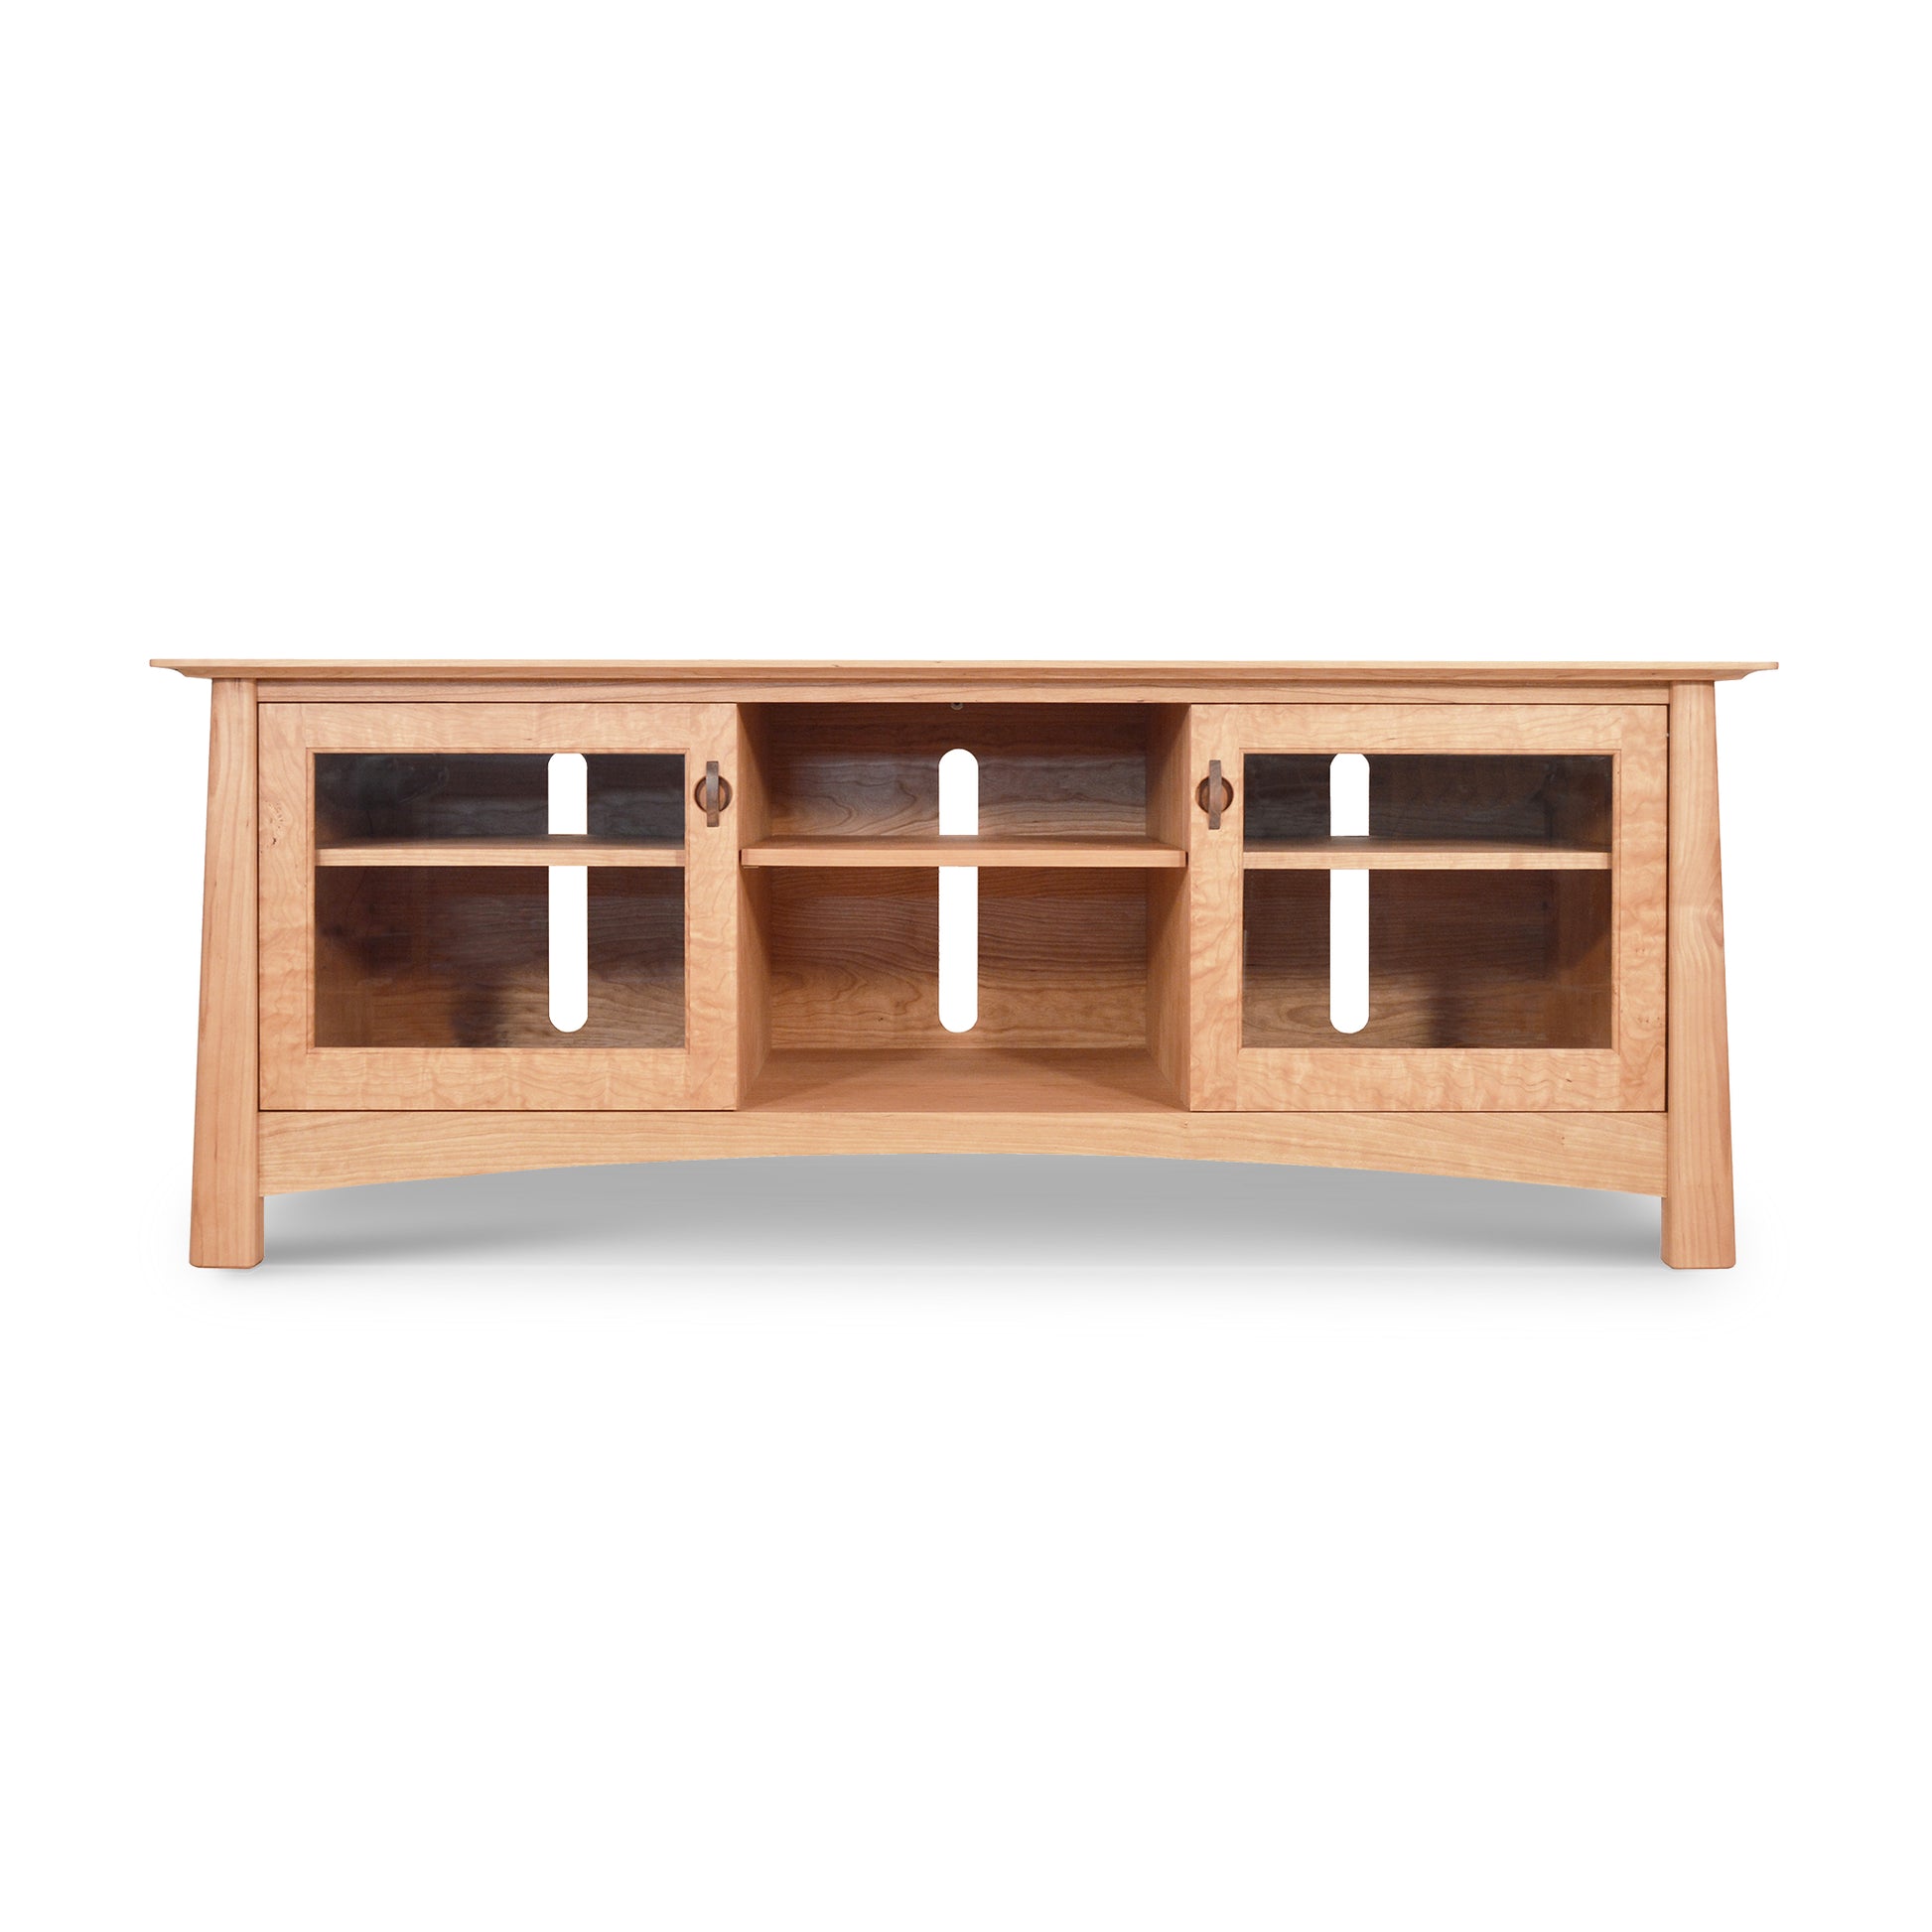 A Maple Corner Woodworks Cherry Moon 68" TV Console with a curved front and three compartments each featuring a white handle on a glass door, set against a white background.